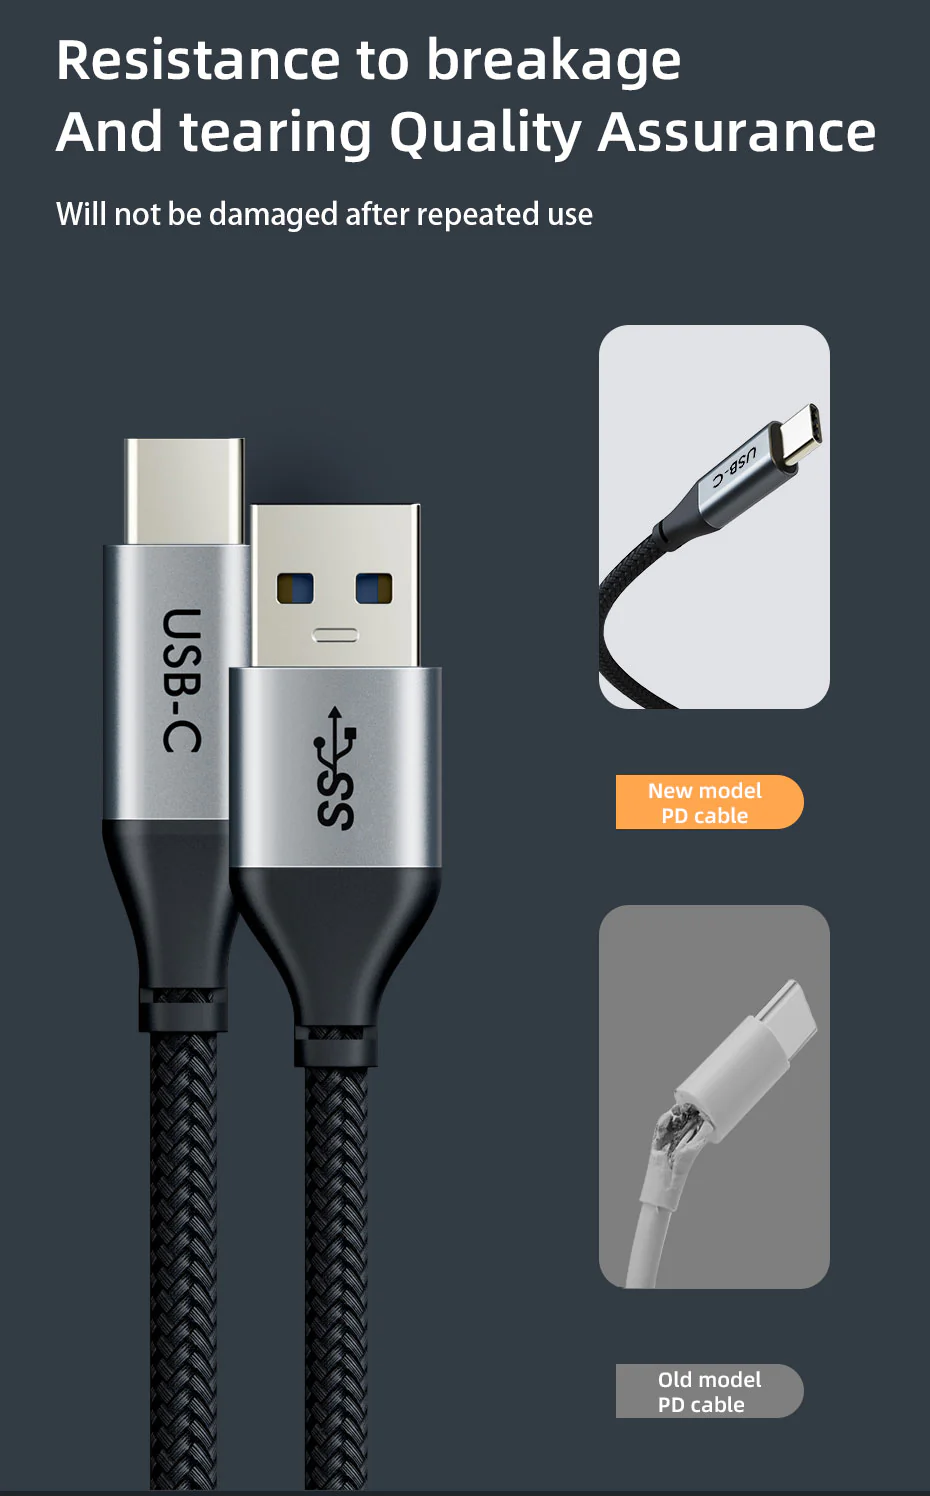 Superspeed 5Gbps USB 3.0 A To USB C Charge Cable 3m